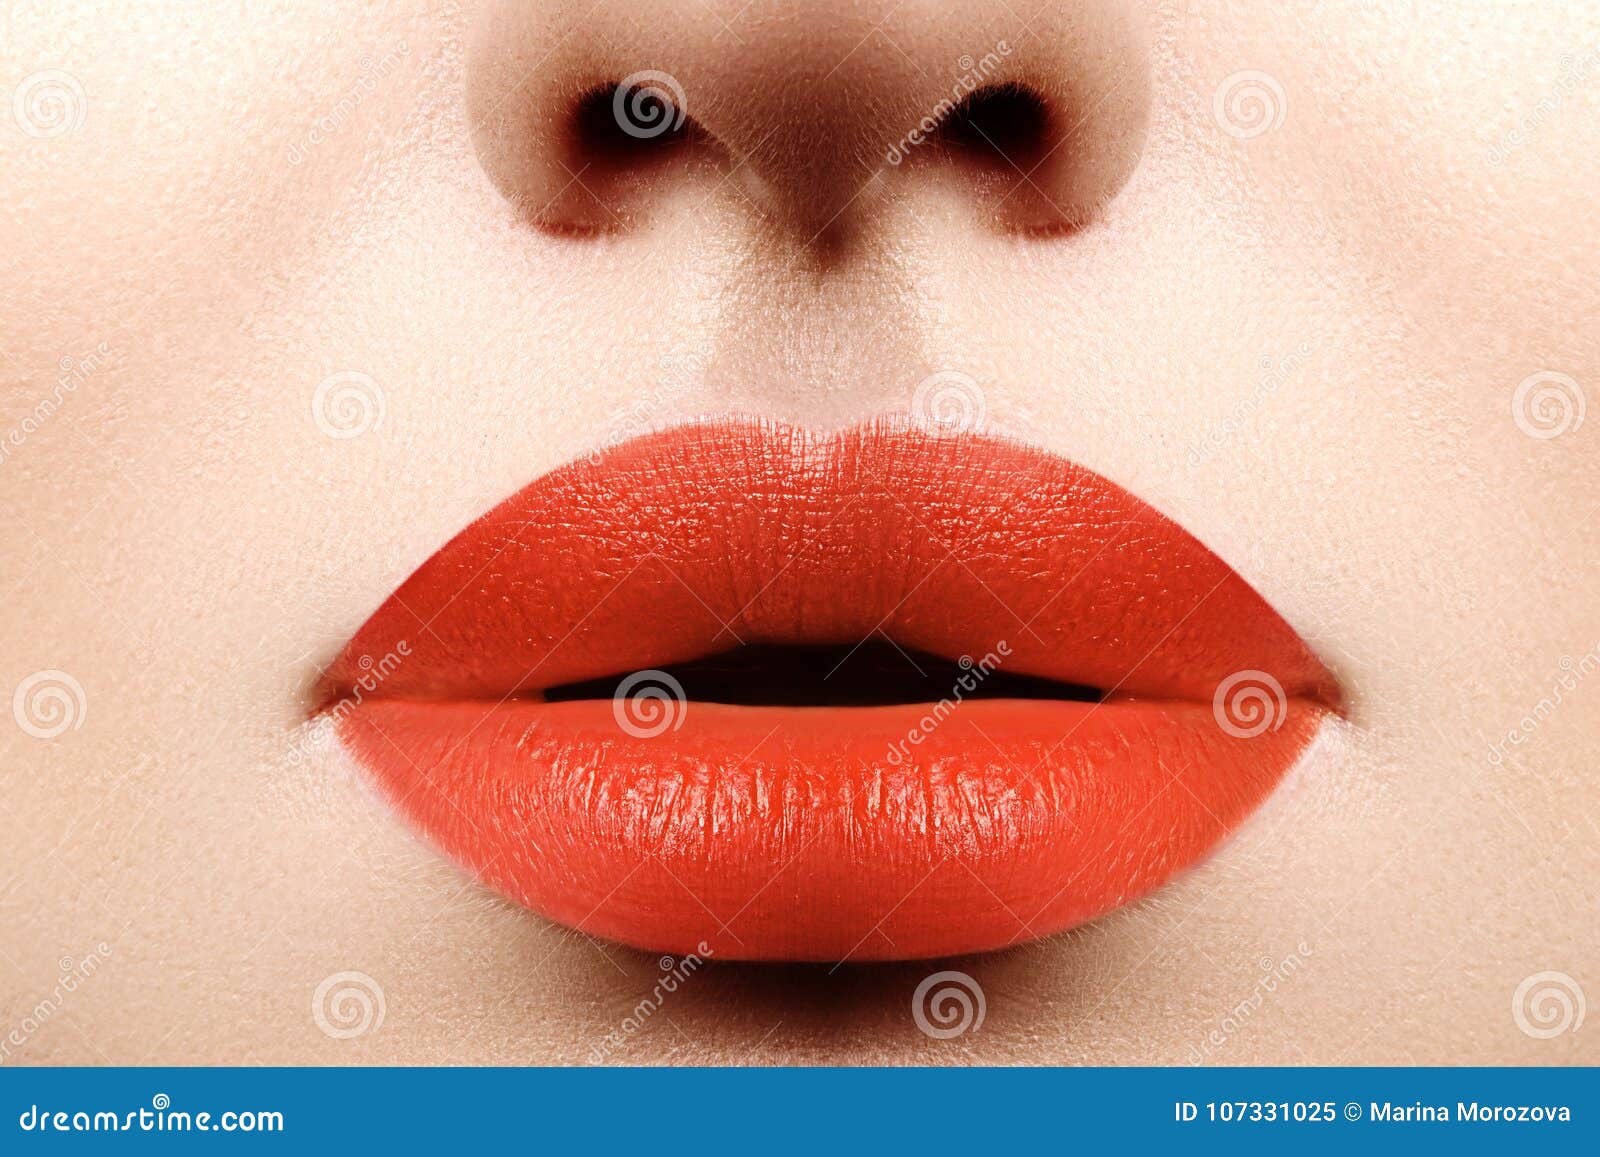 fashion bright makeup. macro of woman`s face. glamour lip make-up with orange lipstick. plastic surgery, filler